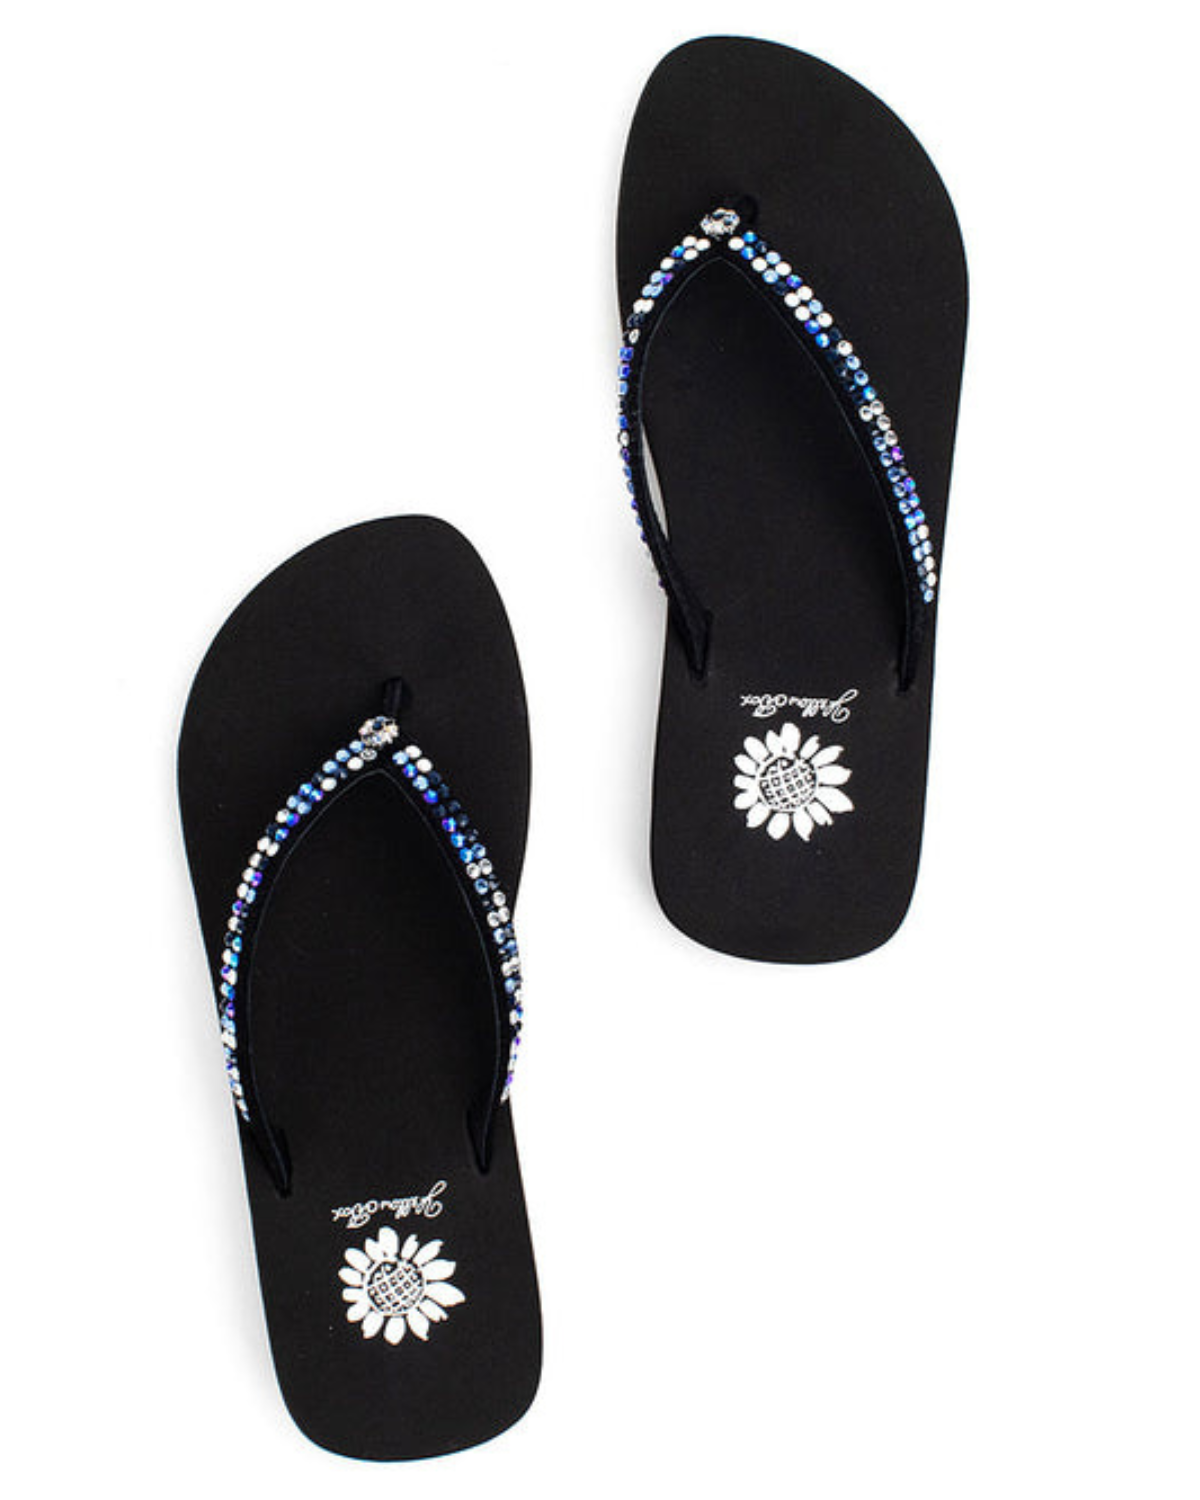 Women's black wedge sandal with multicolored rhinestones on the strap.